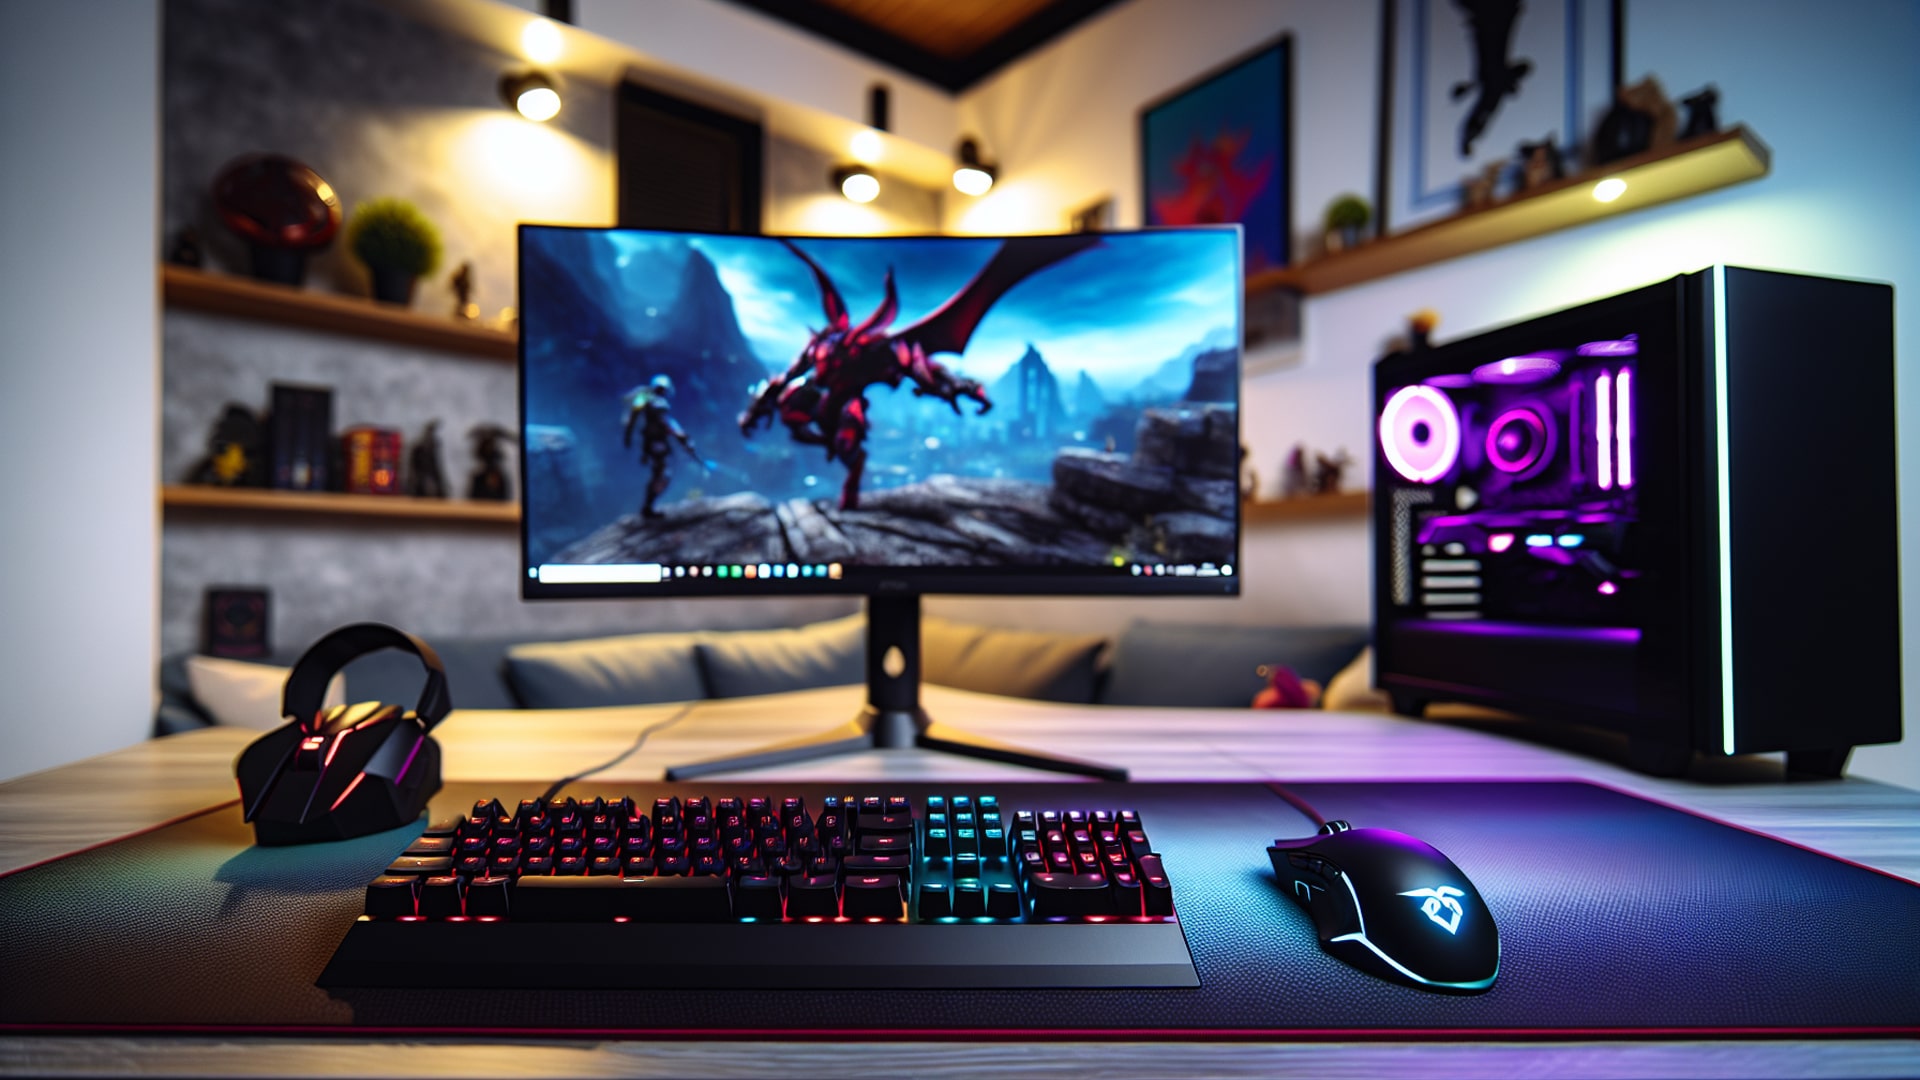 Gaming peripherals for an enhanced gaming experience